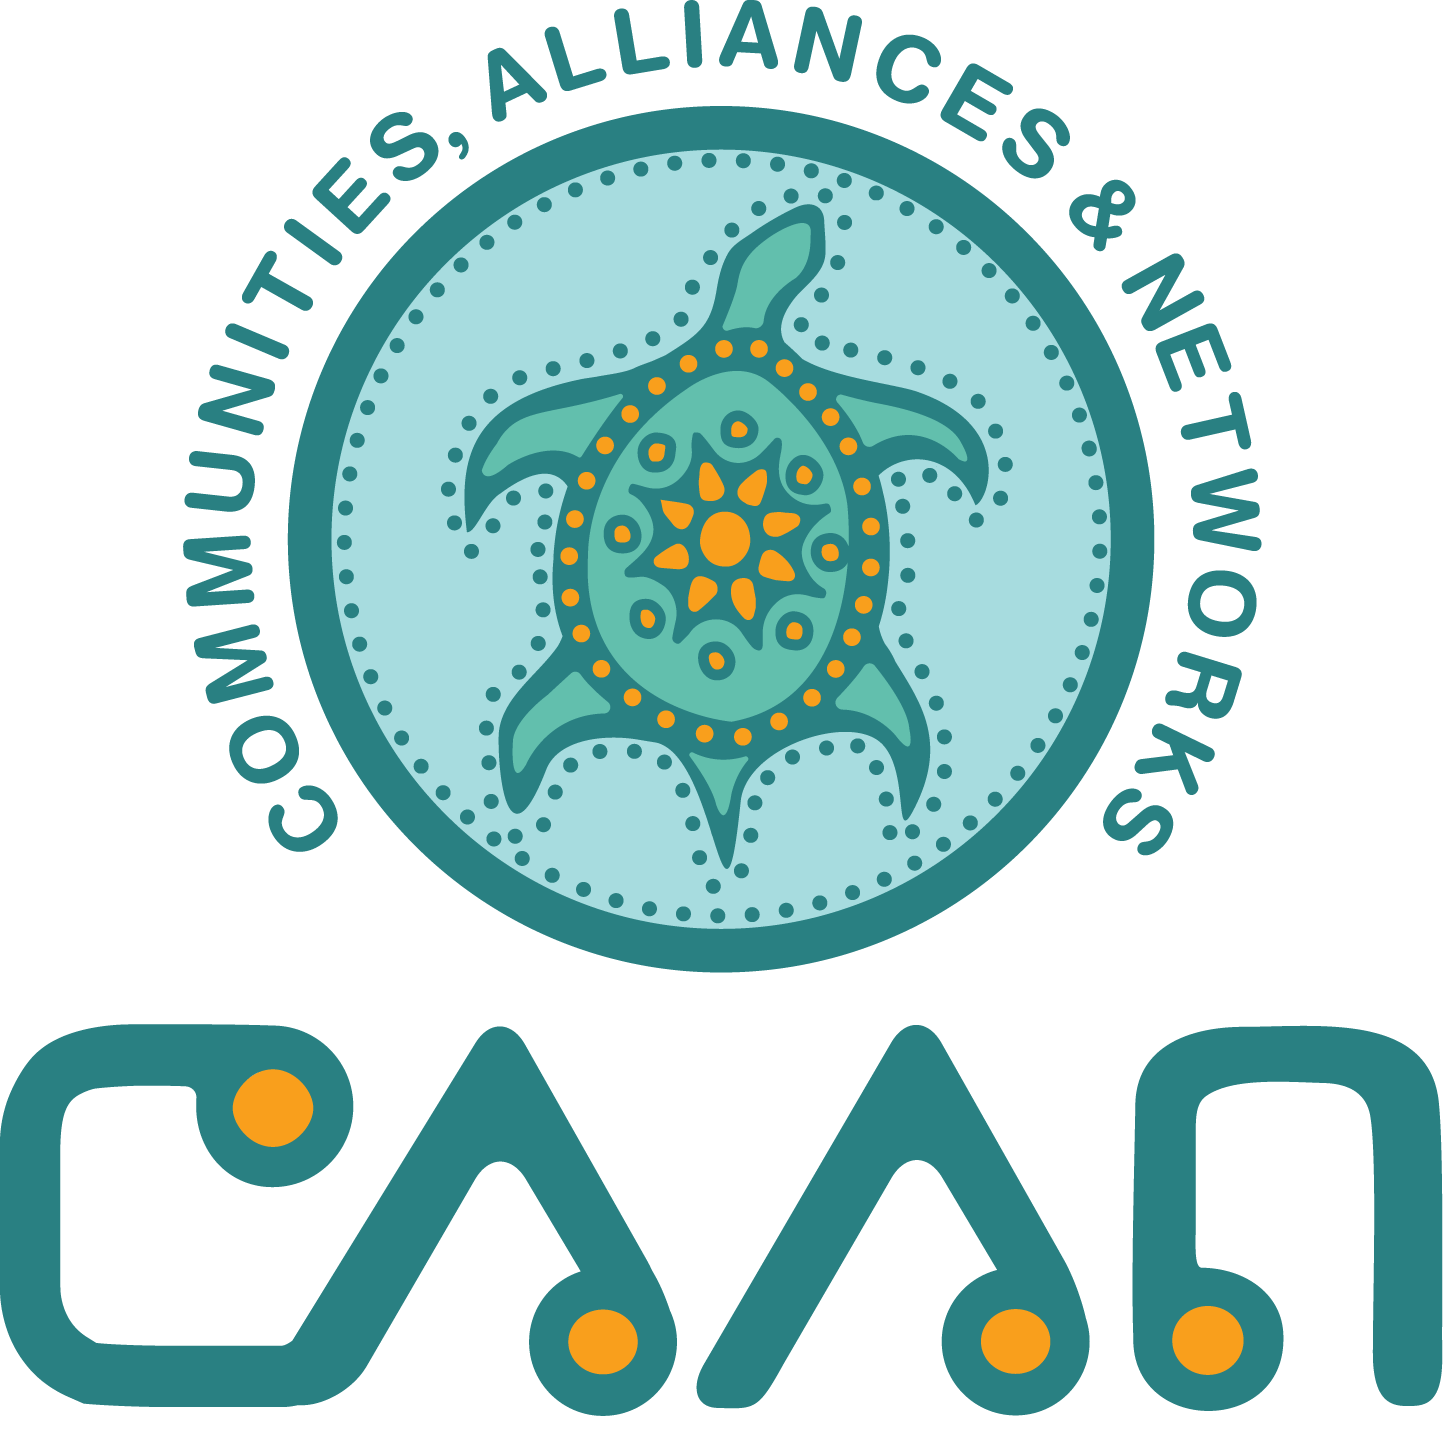 Communities, Alliances, and Networks (CAAN)